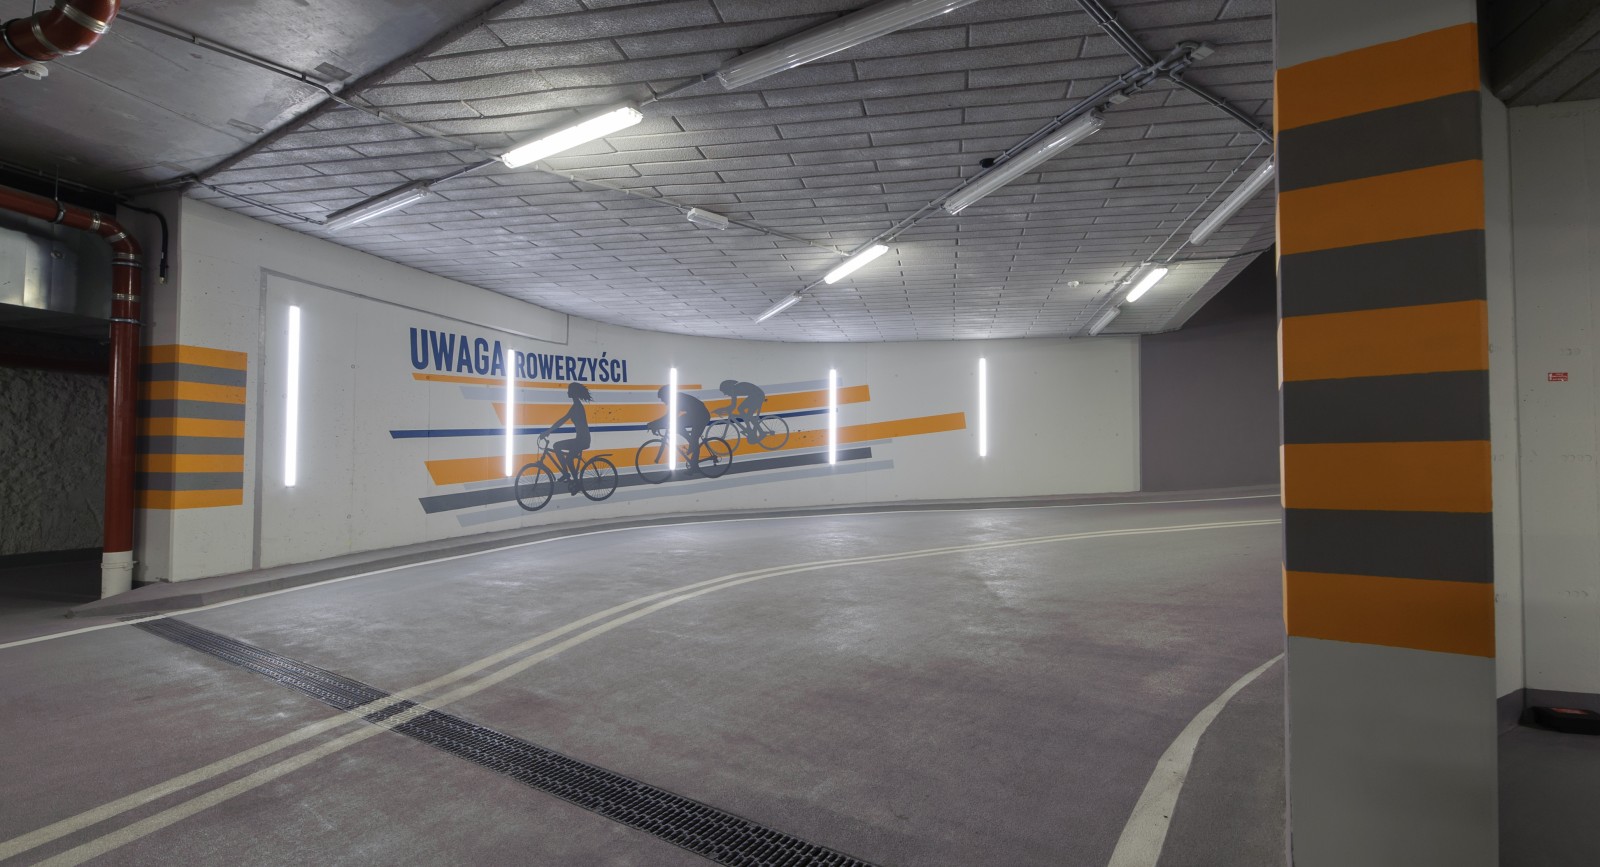 Underground garage paintings in Proximo office building created by polish artists | PROXIMO | Portfolio